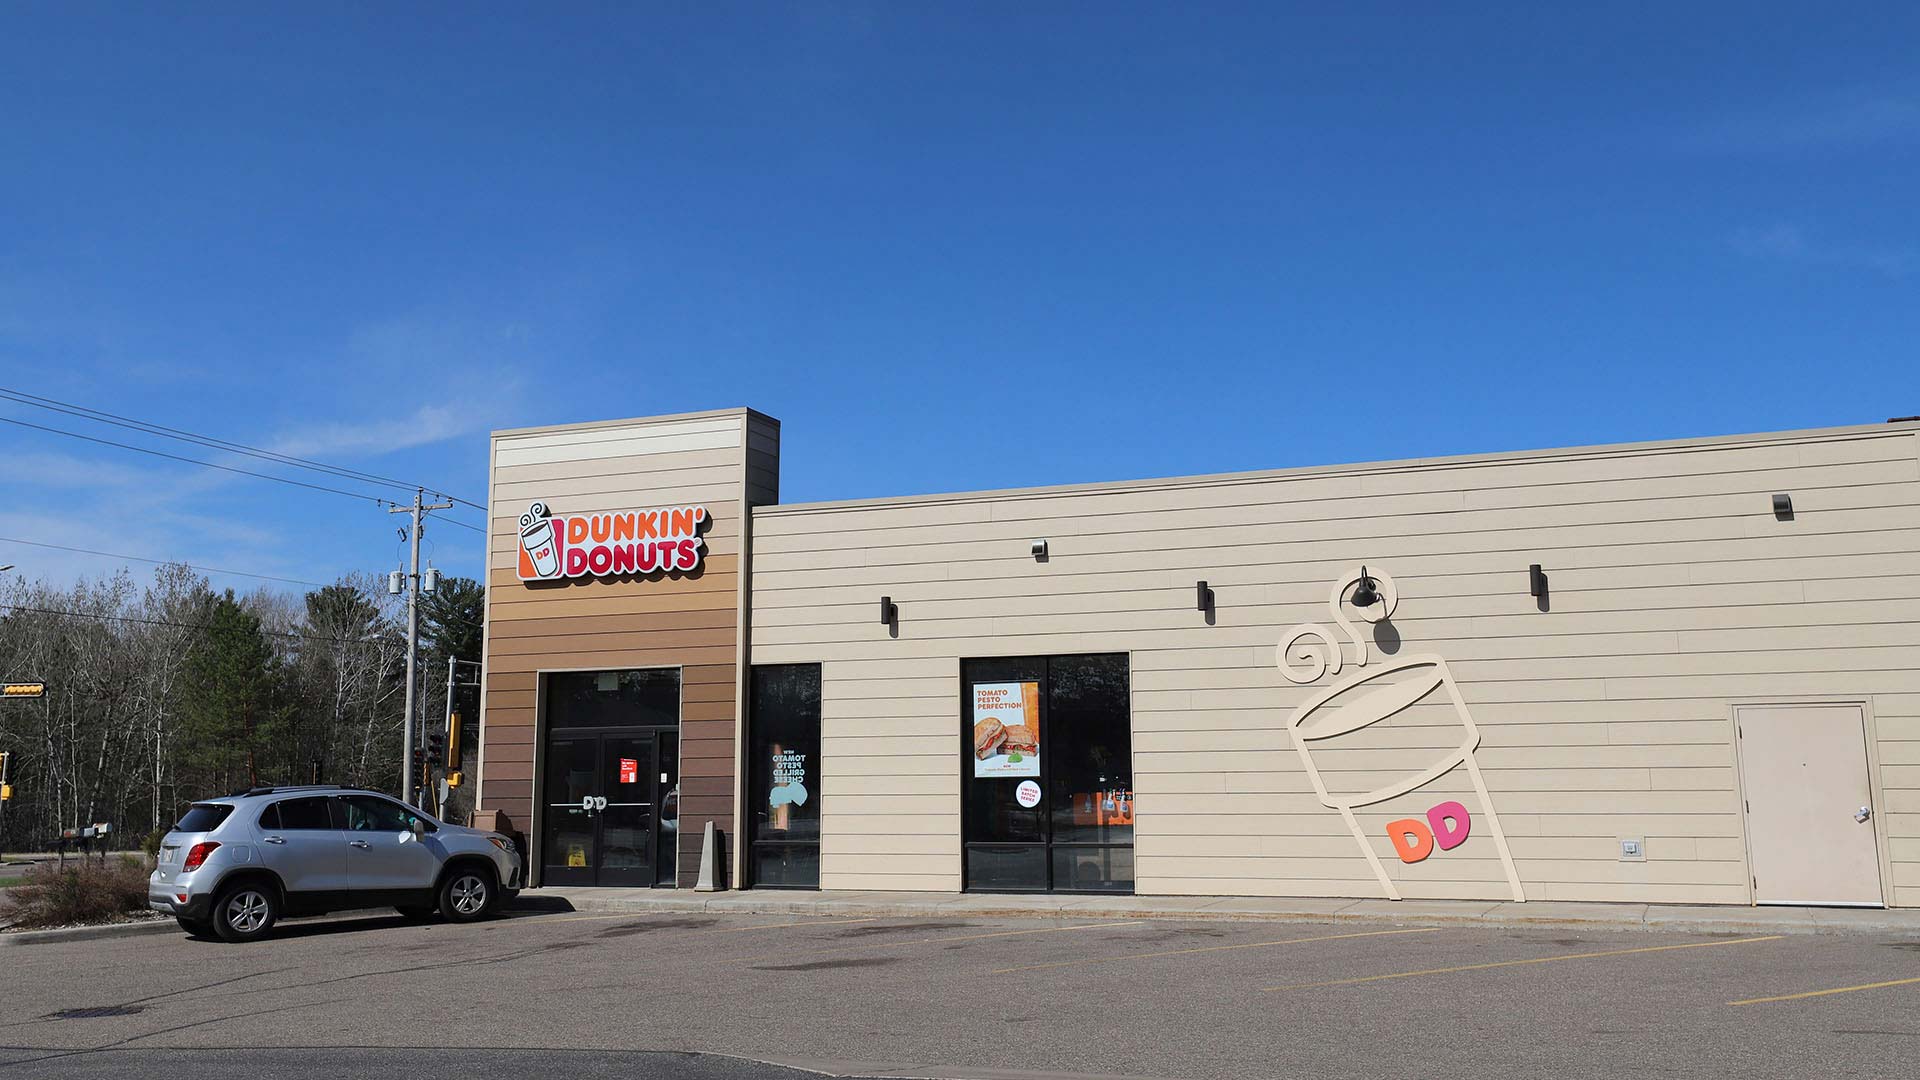 Exterior of Dunkin Donuts with sign